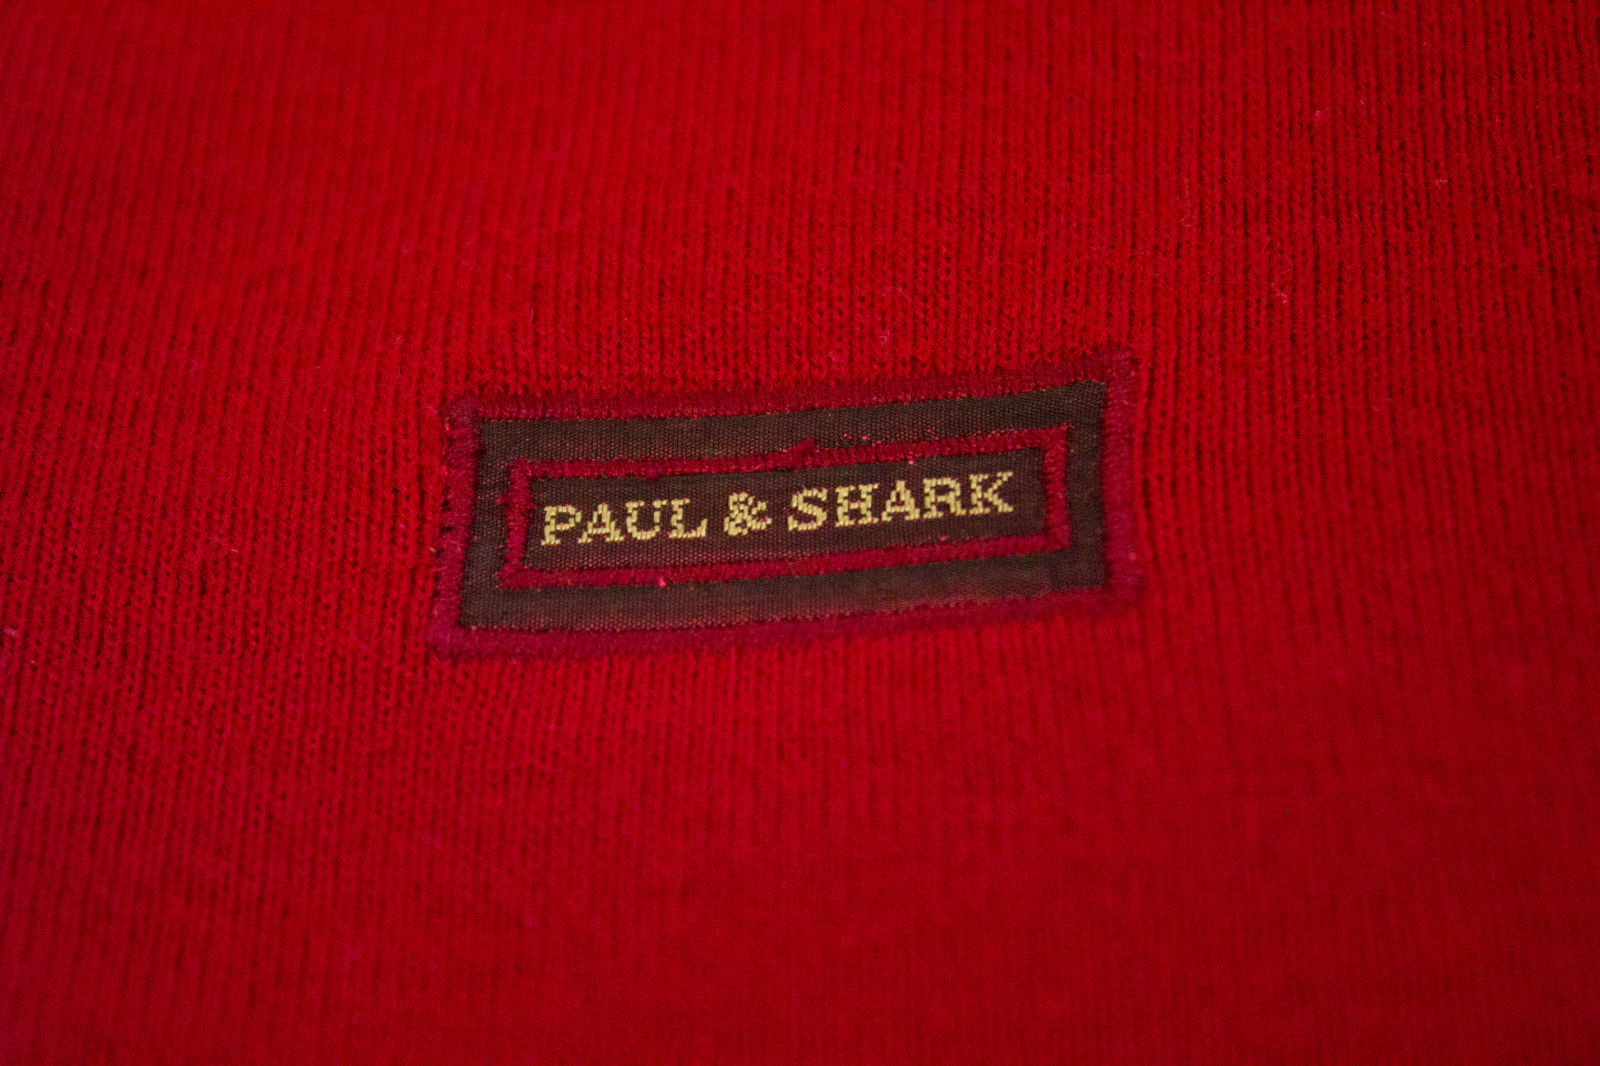 PAUL & SHARK Yachting Men's Wool Red Jumper, L - secondfirst